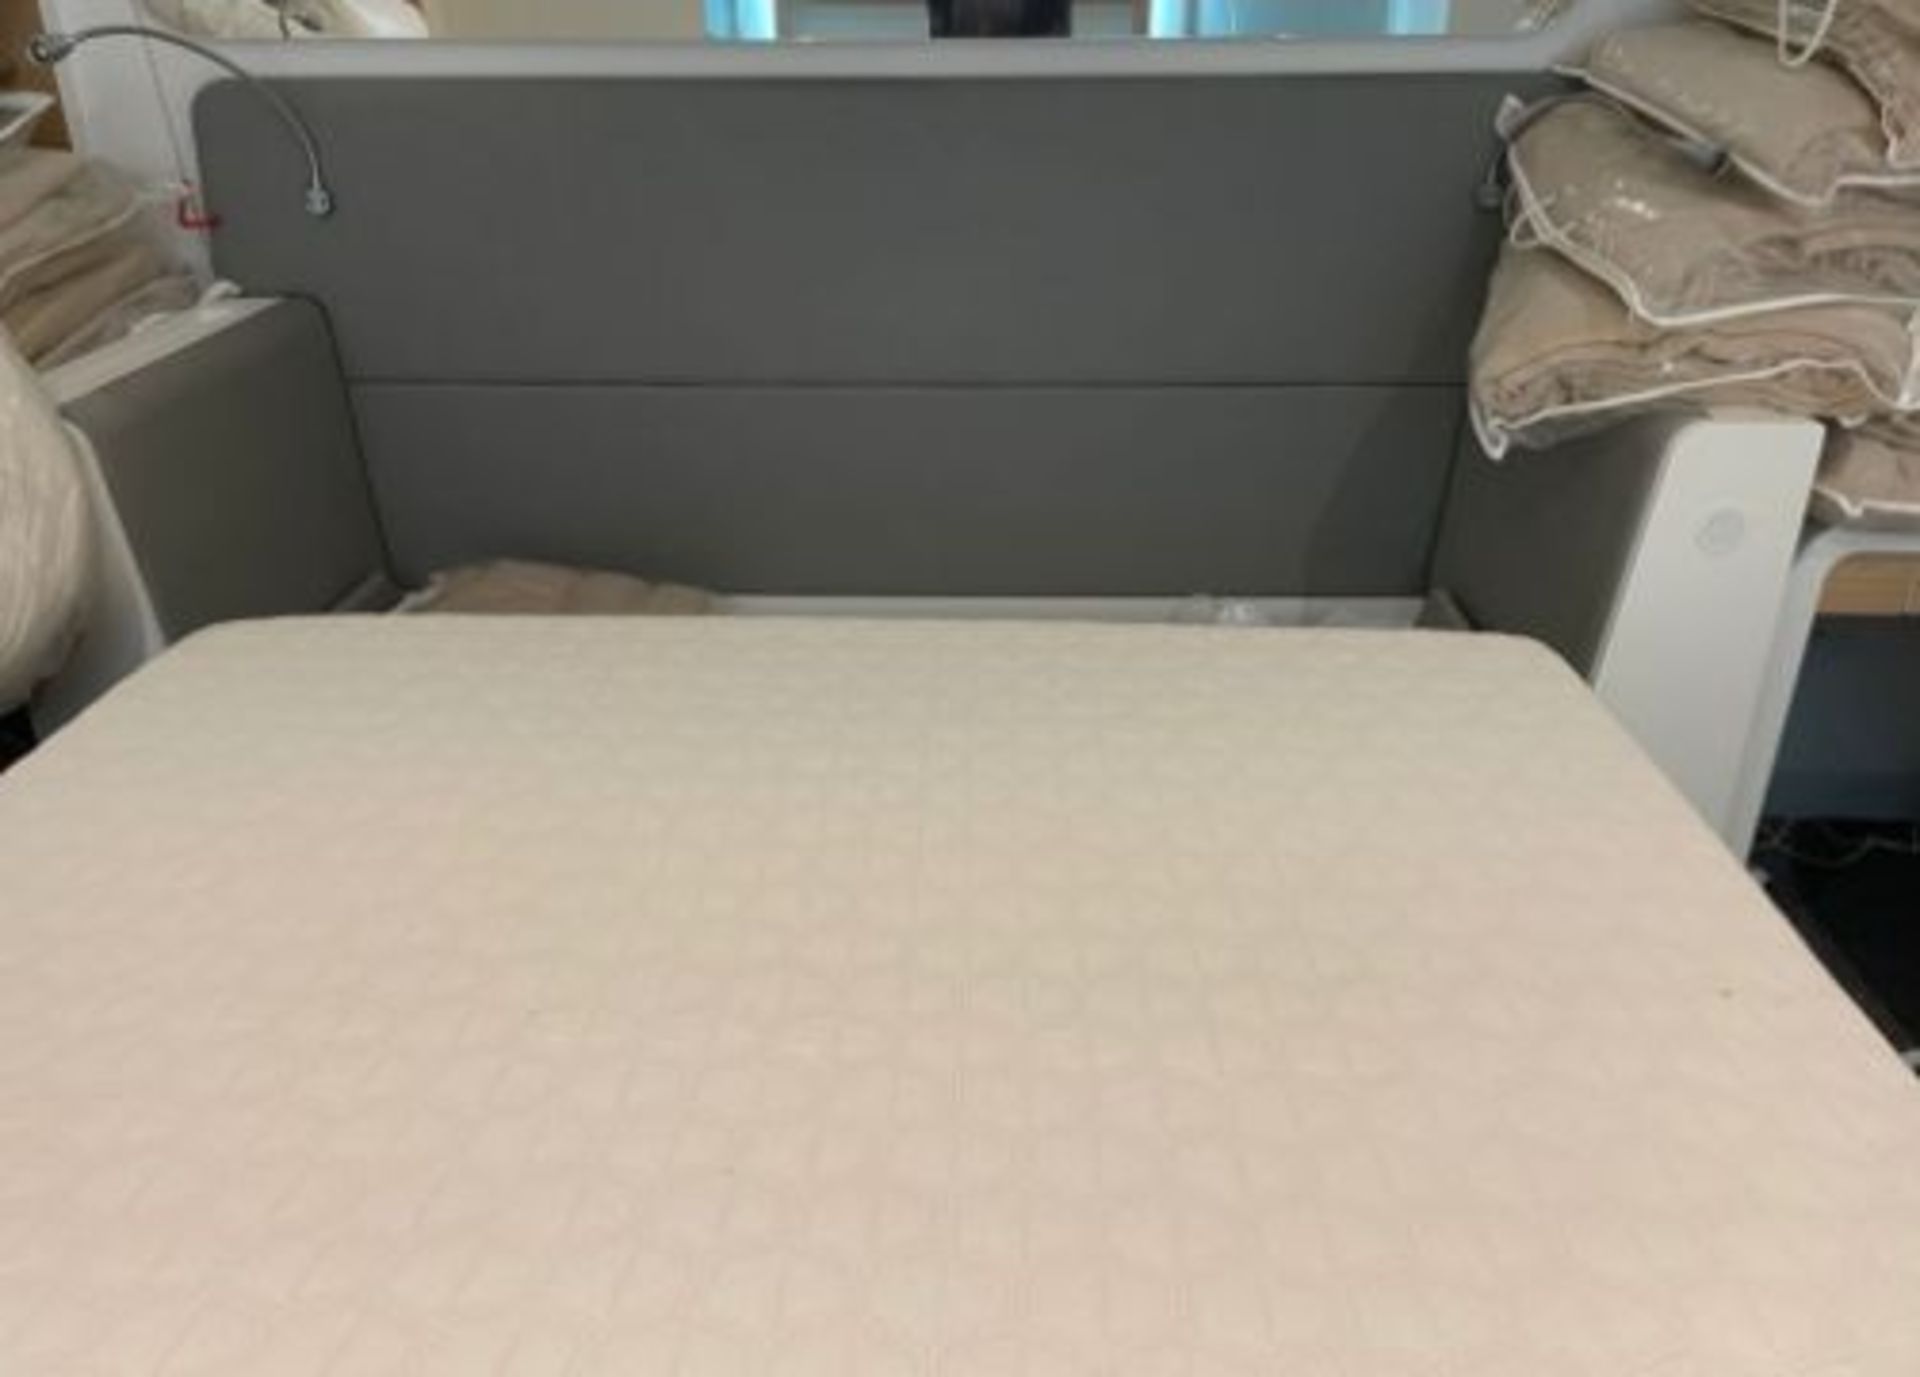 1 x Double Adjustable Space Saving Smart Bed With Serta Motion Memory Foam Mattress - Signature - Image 12 of 12